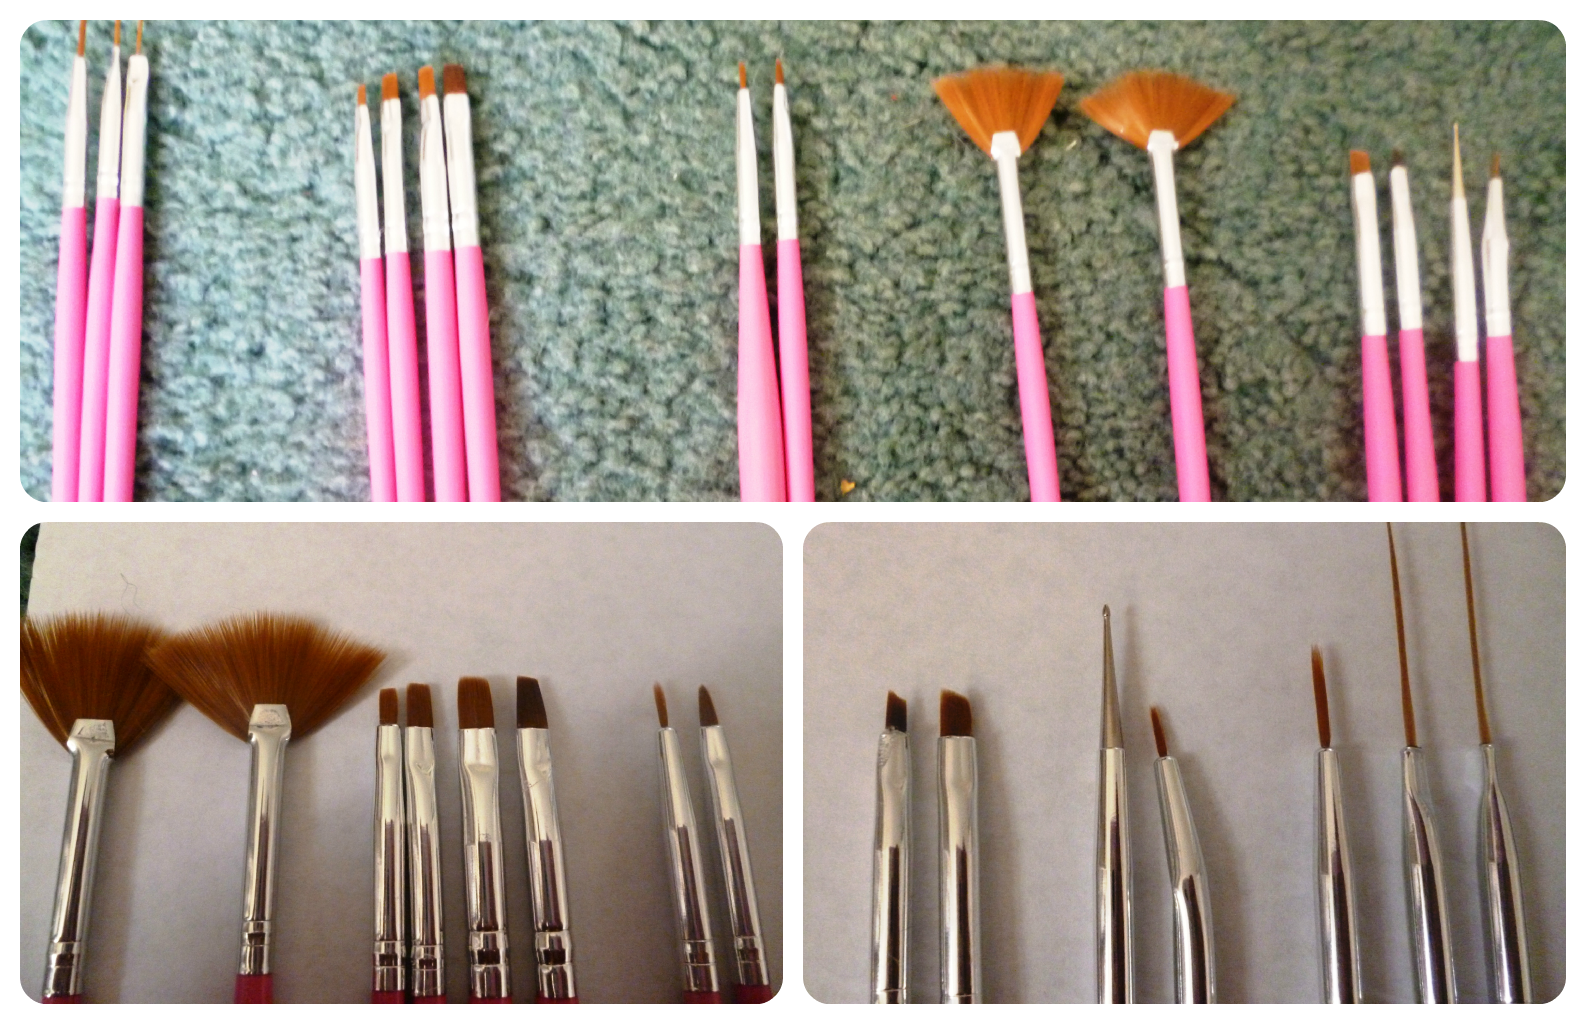 2. Nail Art Brushes - wide 4